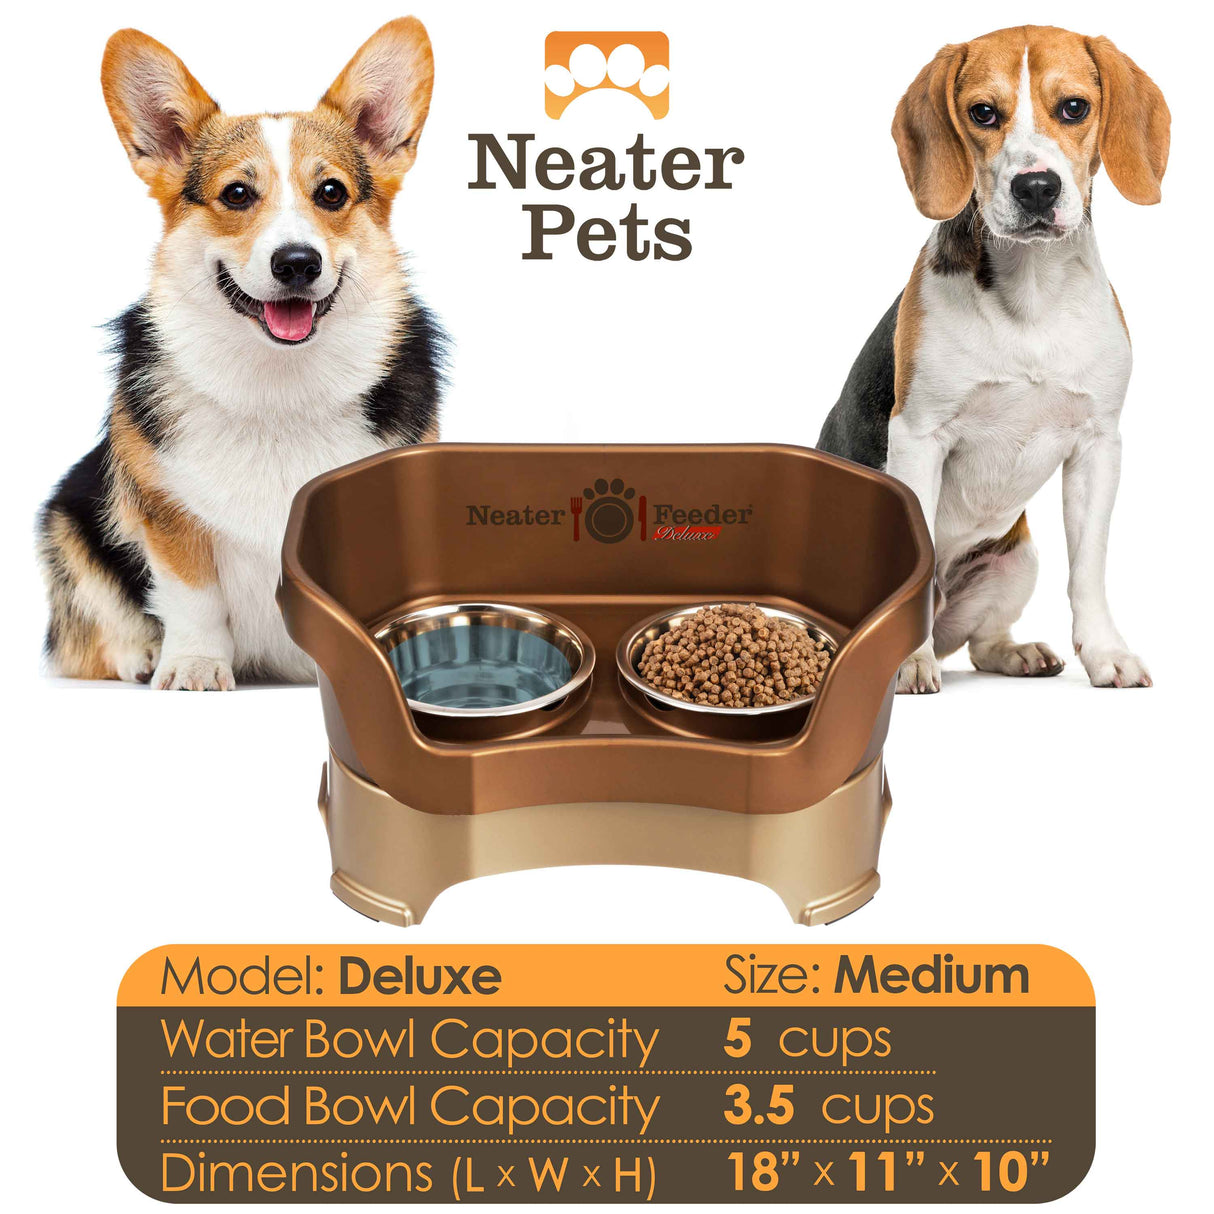 Deluxe medium bowl capacity and dimensions